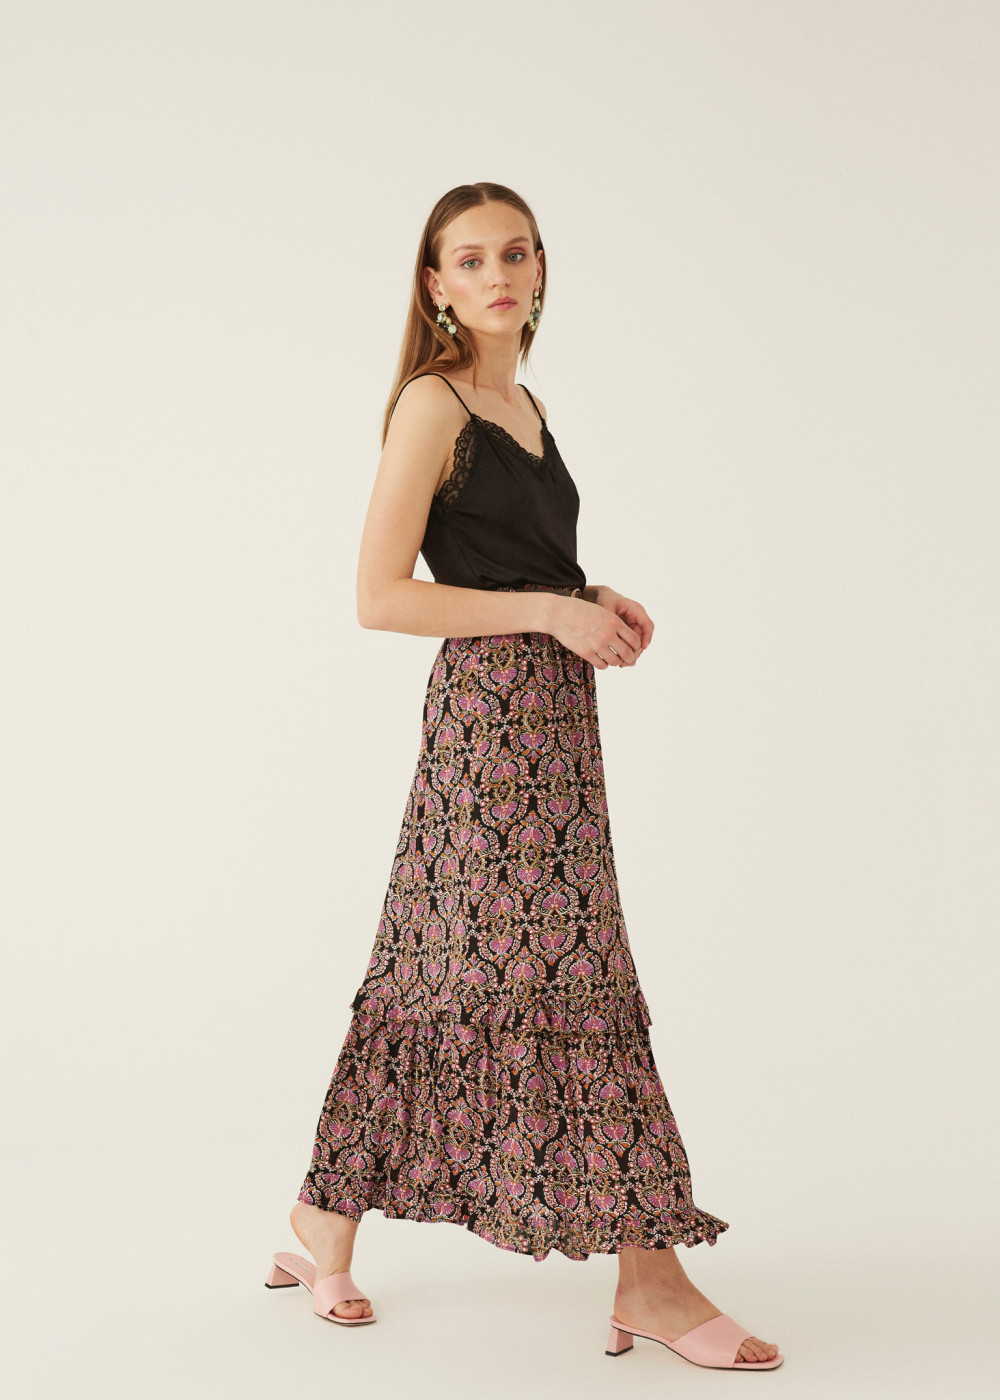 Arched Patterned Skirt